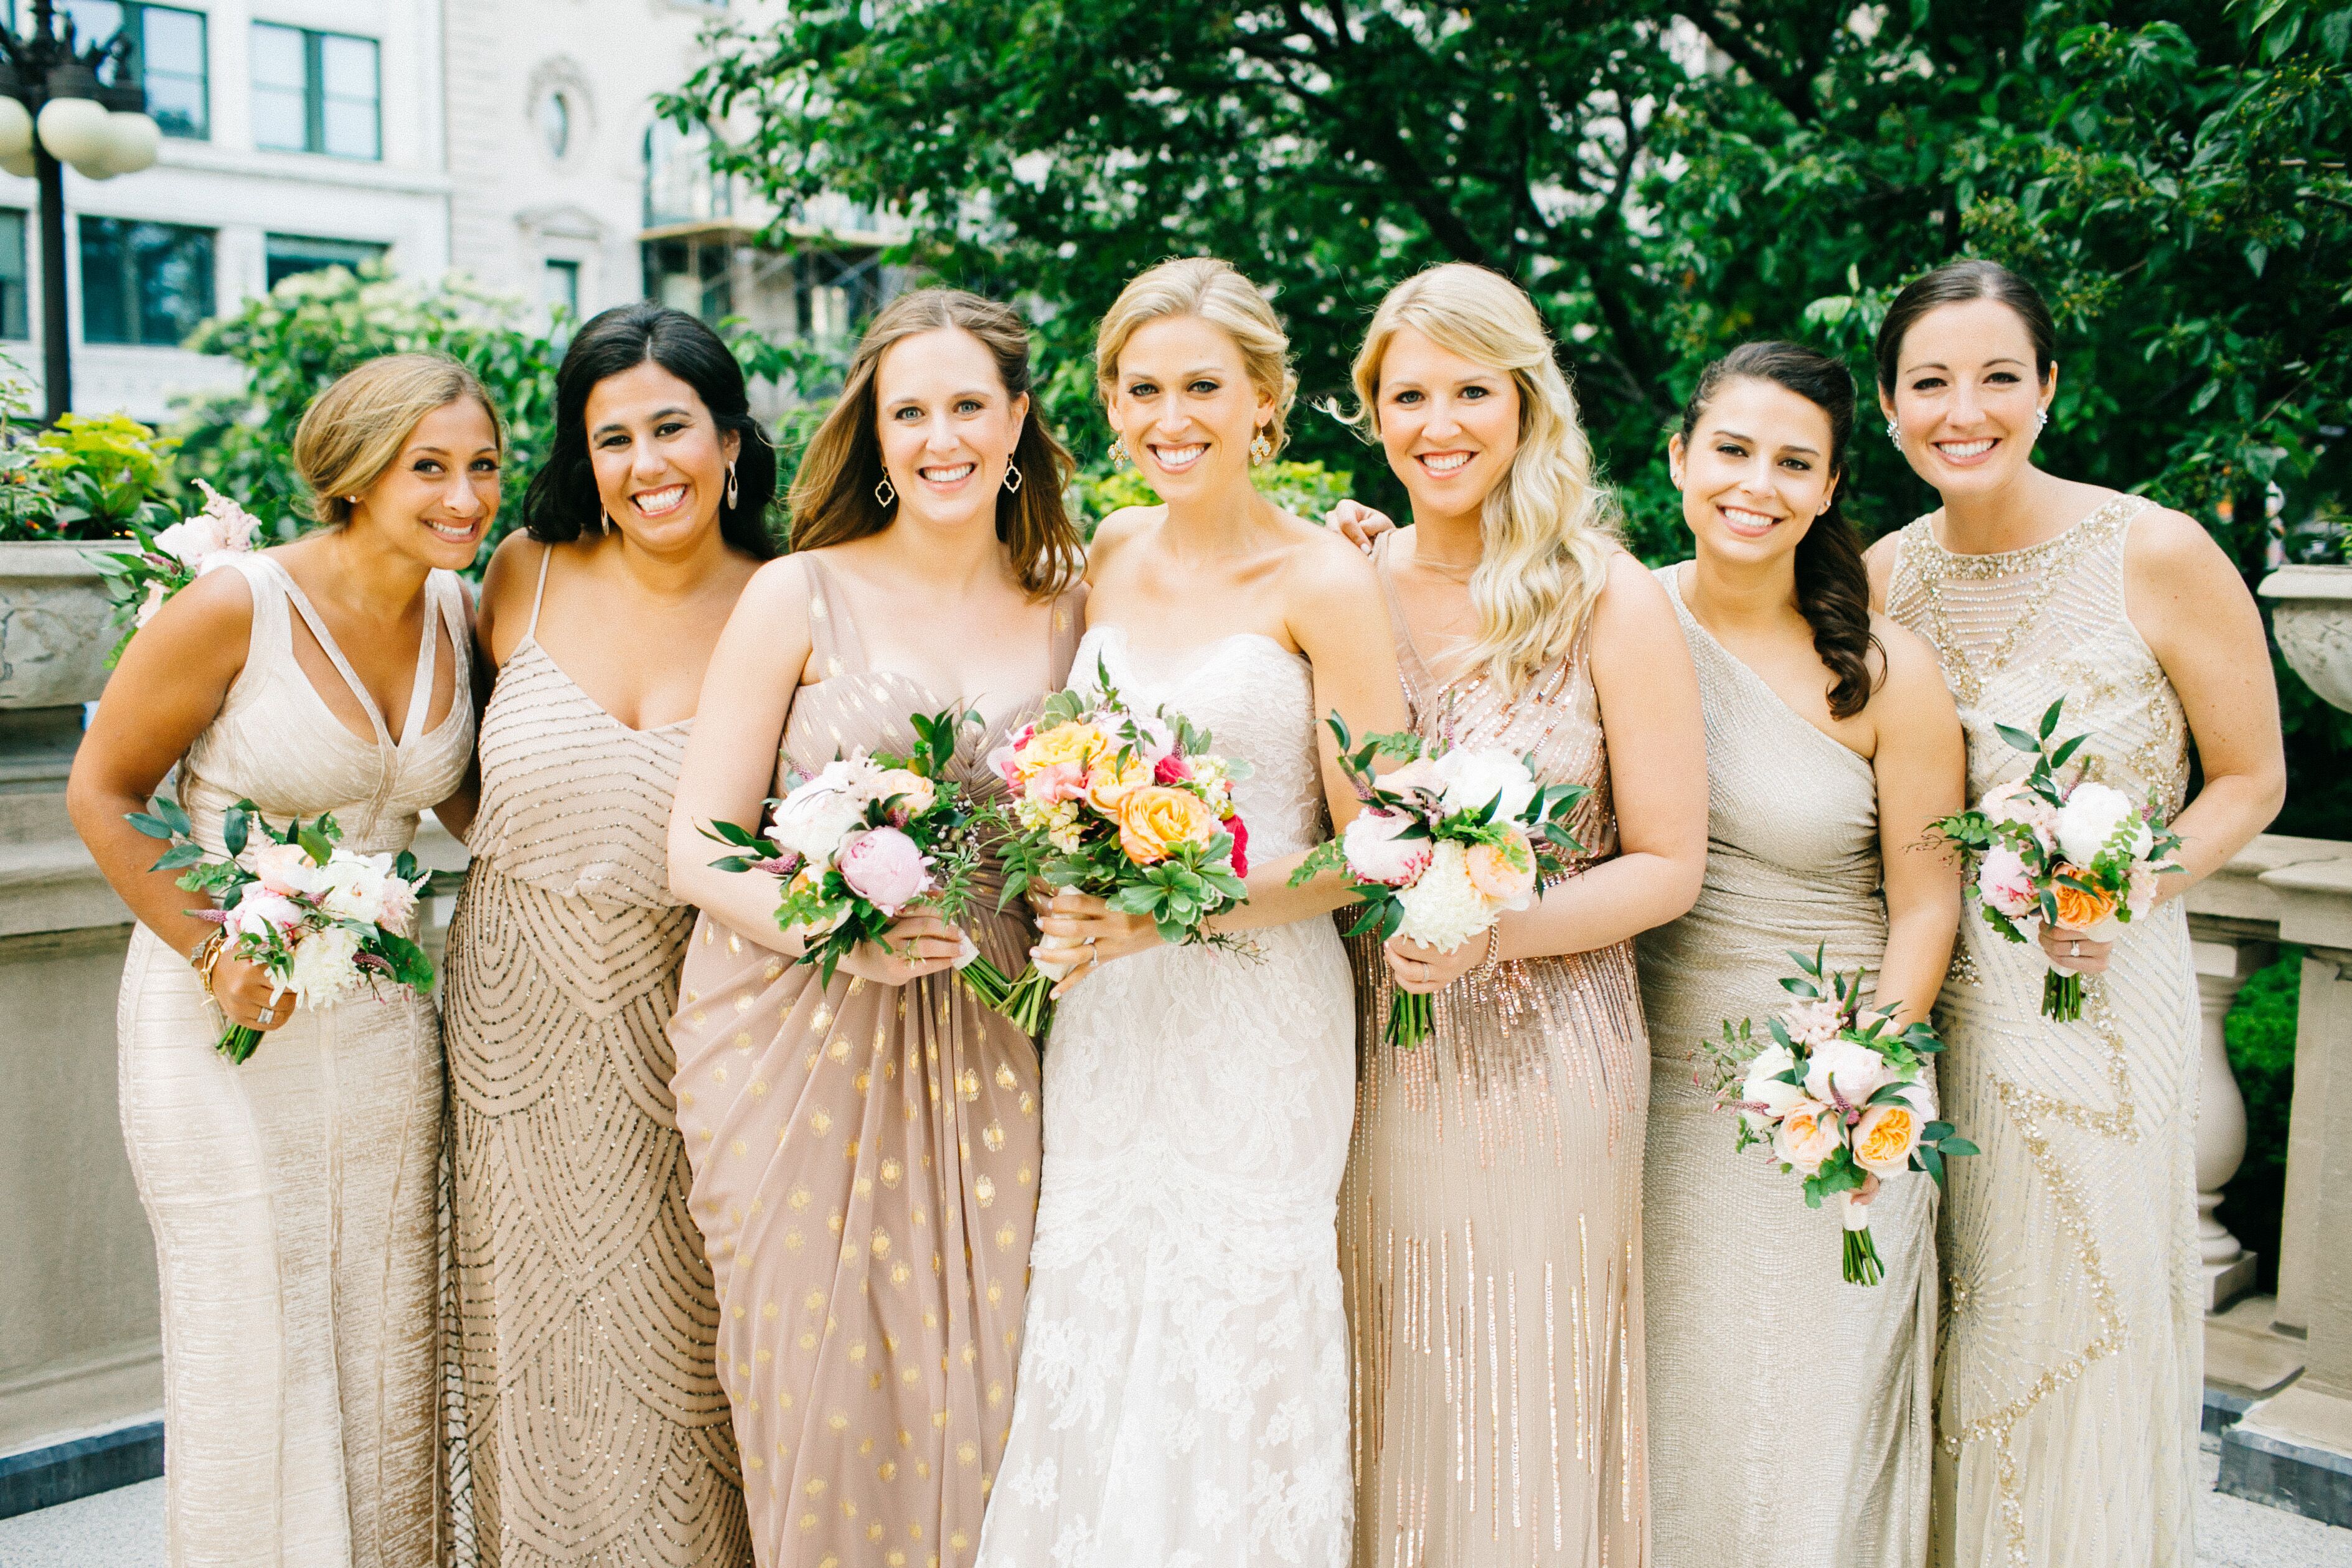 Short Vs. Long Bridesmaid Dresses: How to Pick the Right One for Your Girls